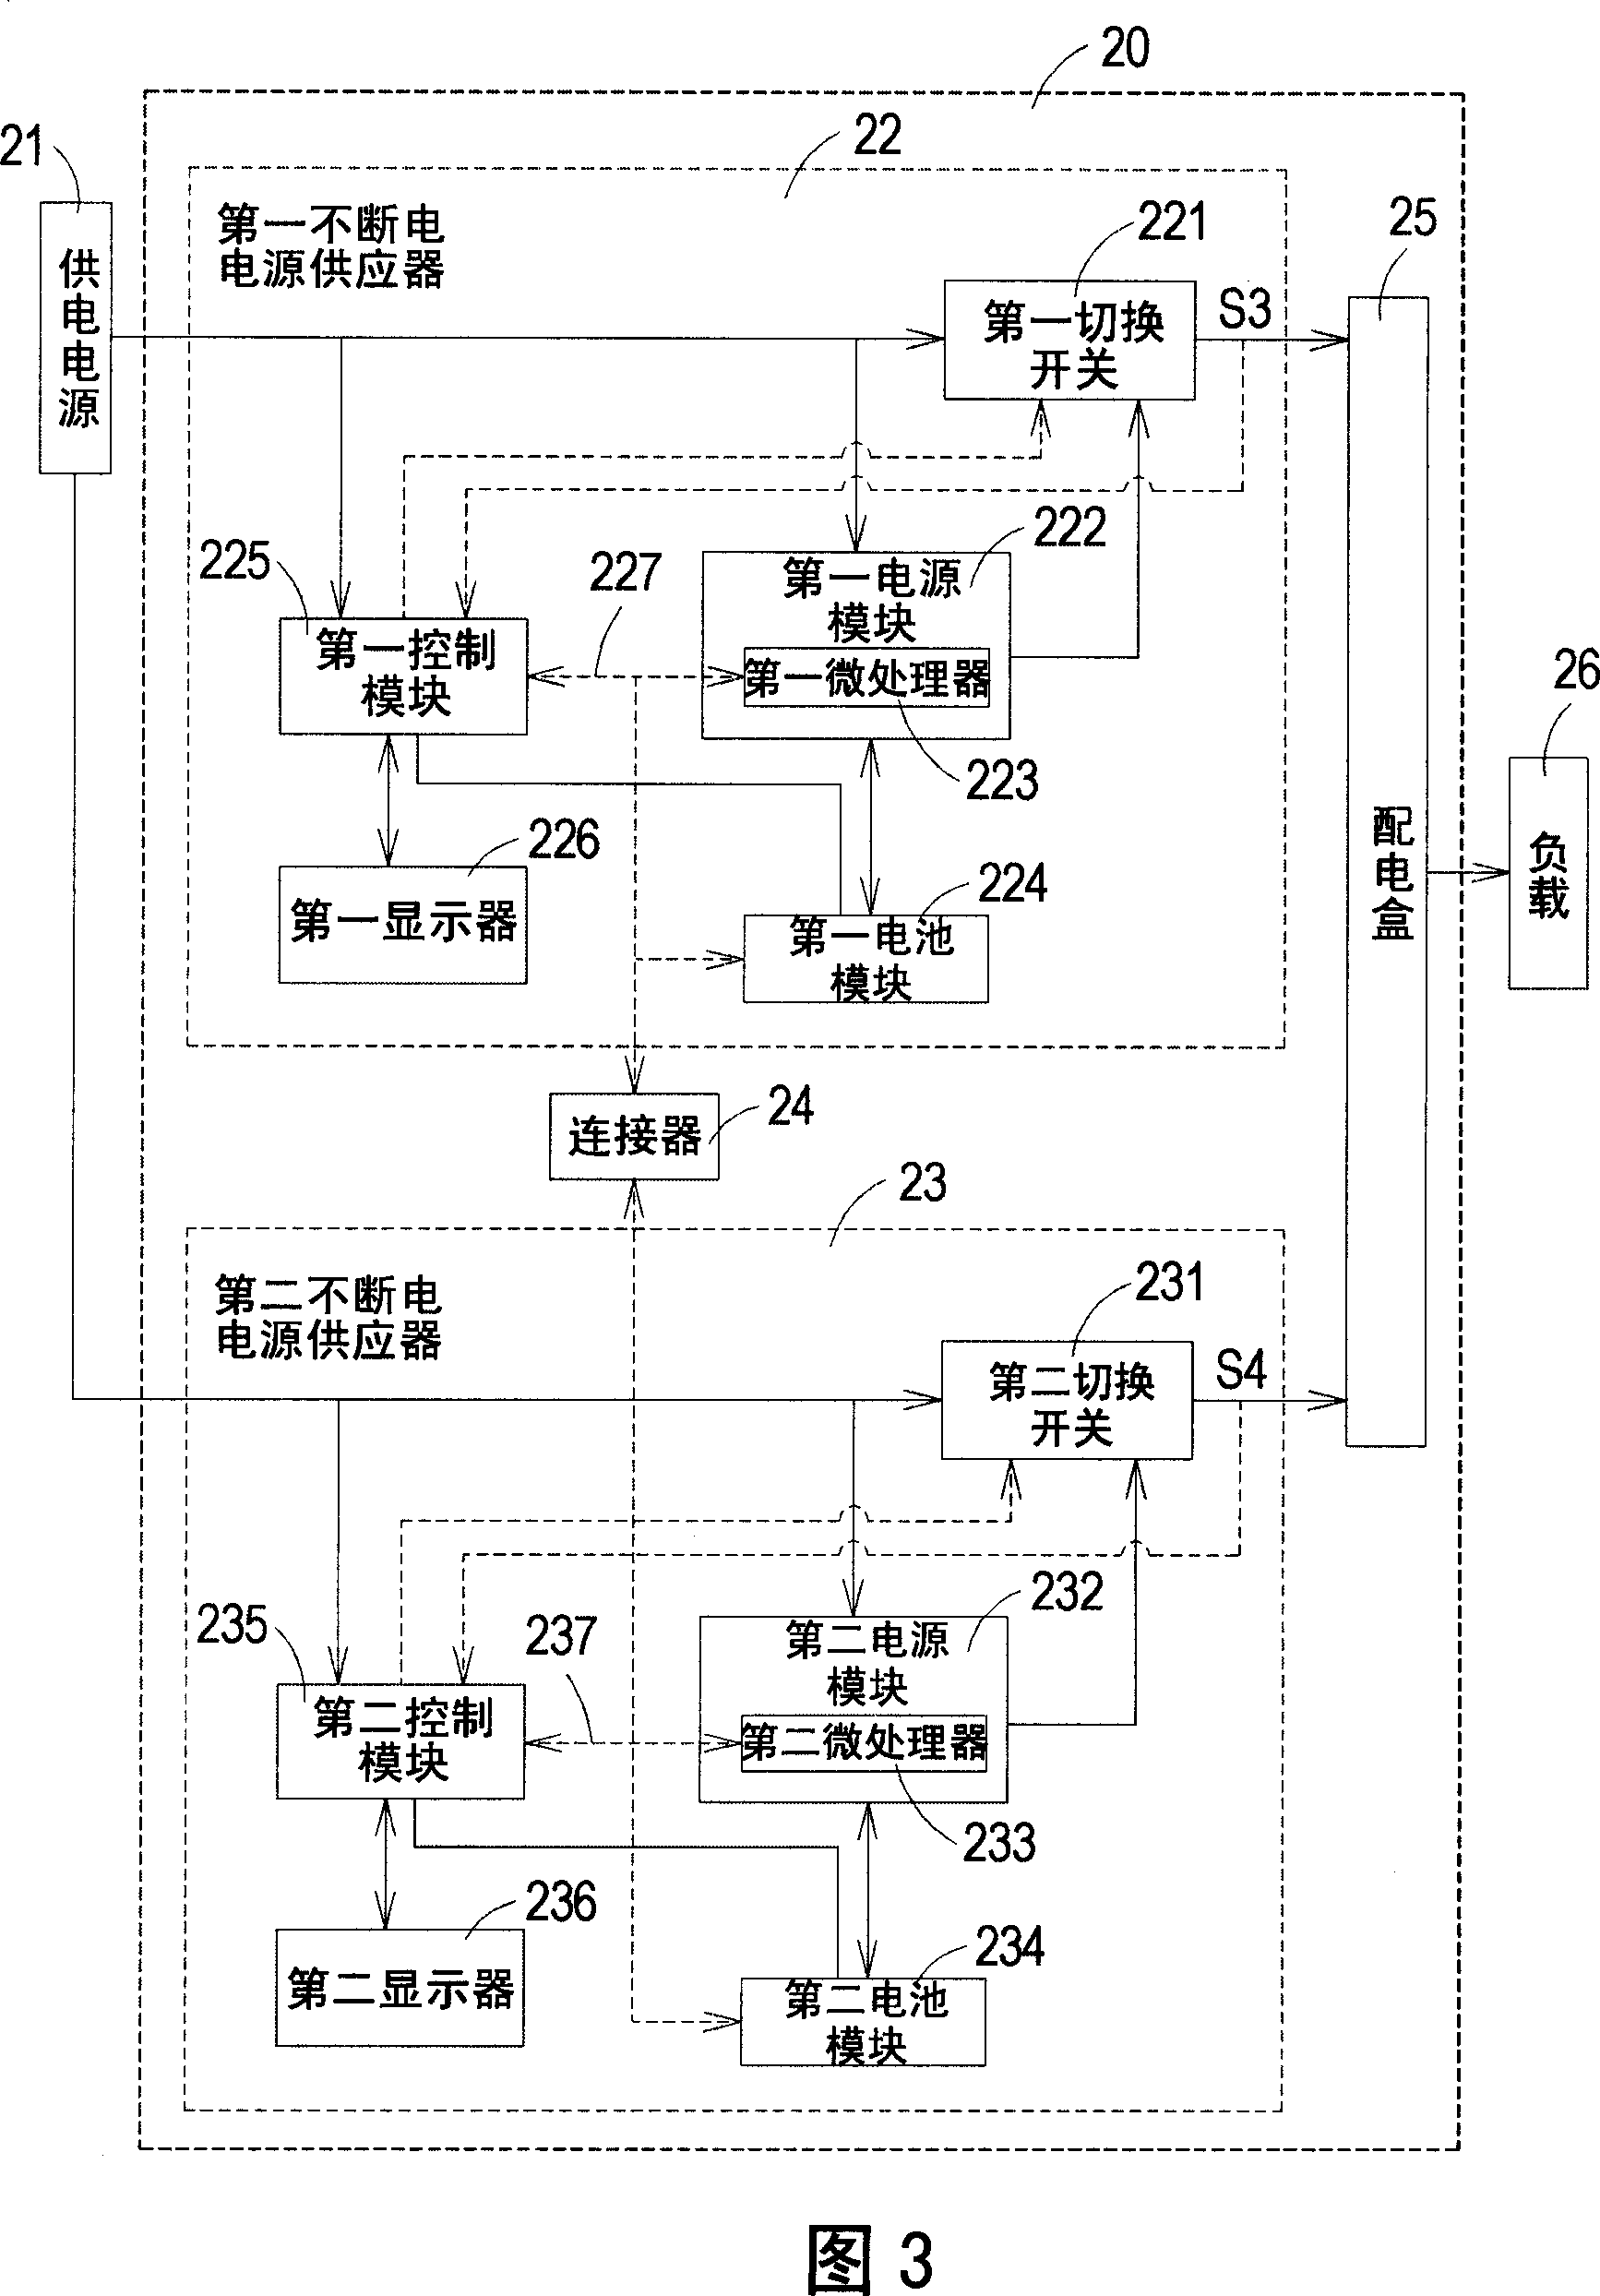 Parallel uninterrupted power supply system